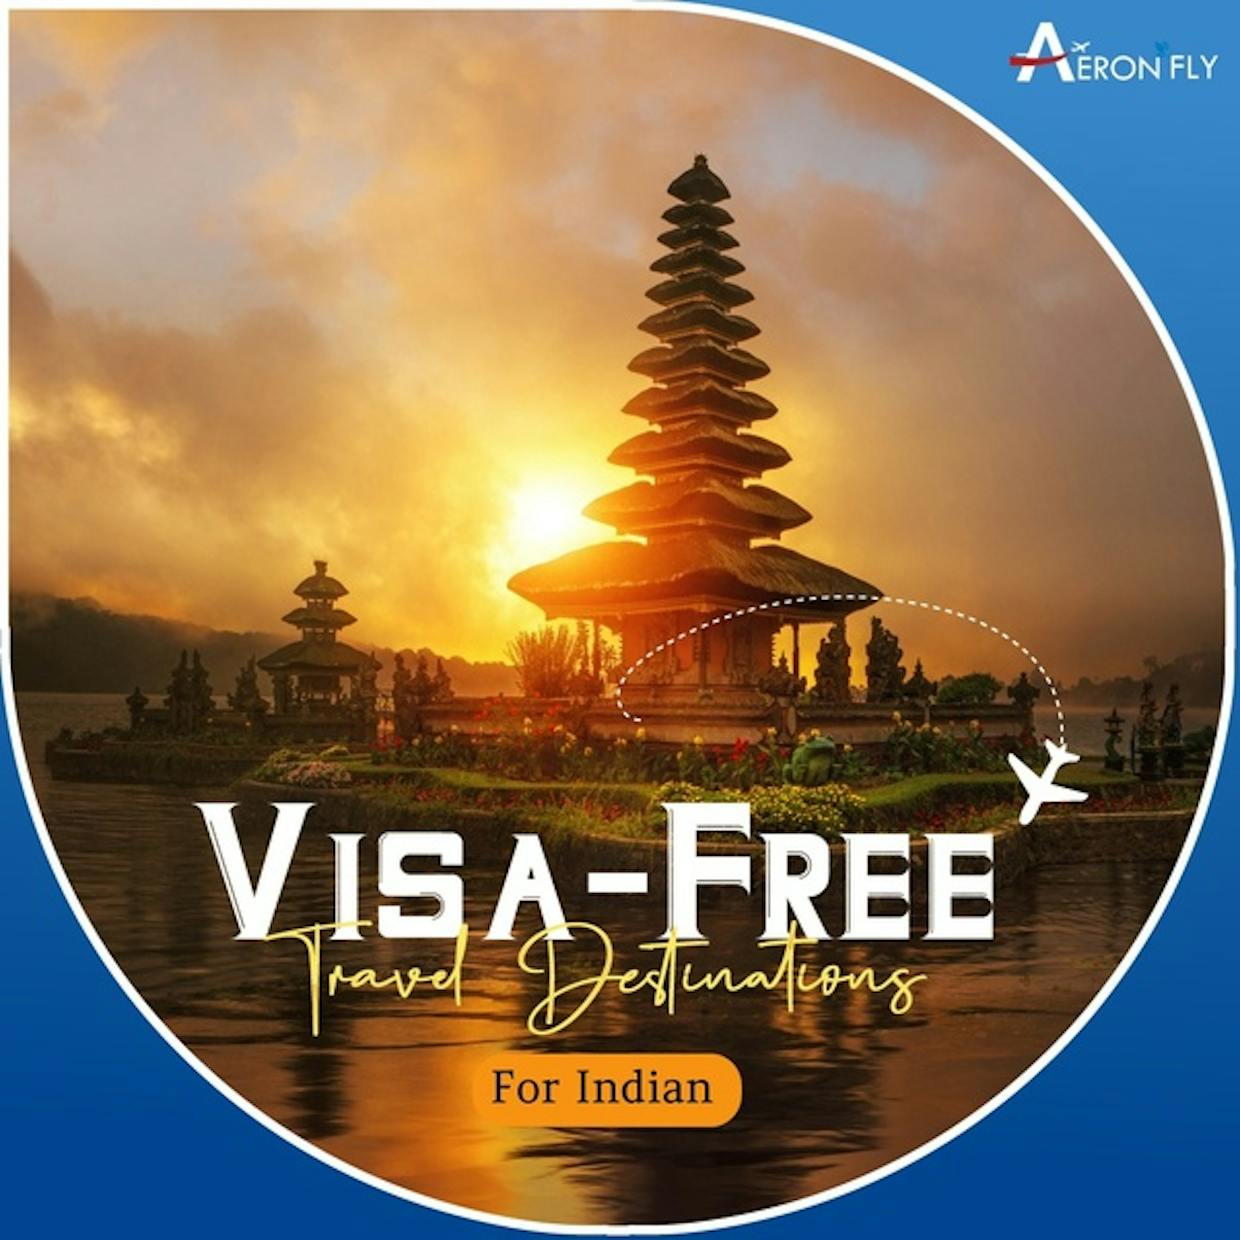 Which places are visa-free travel destinations for Indians?